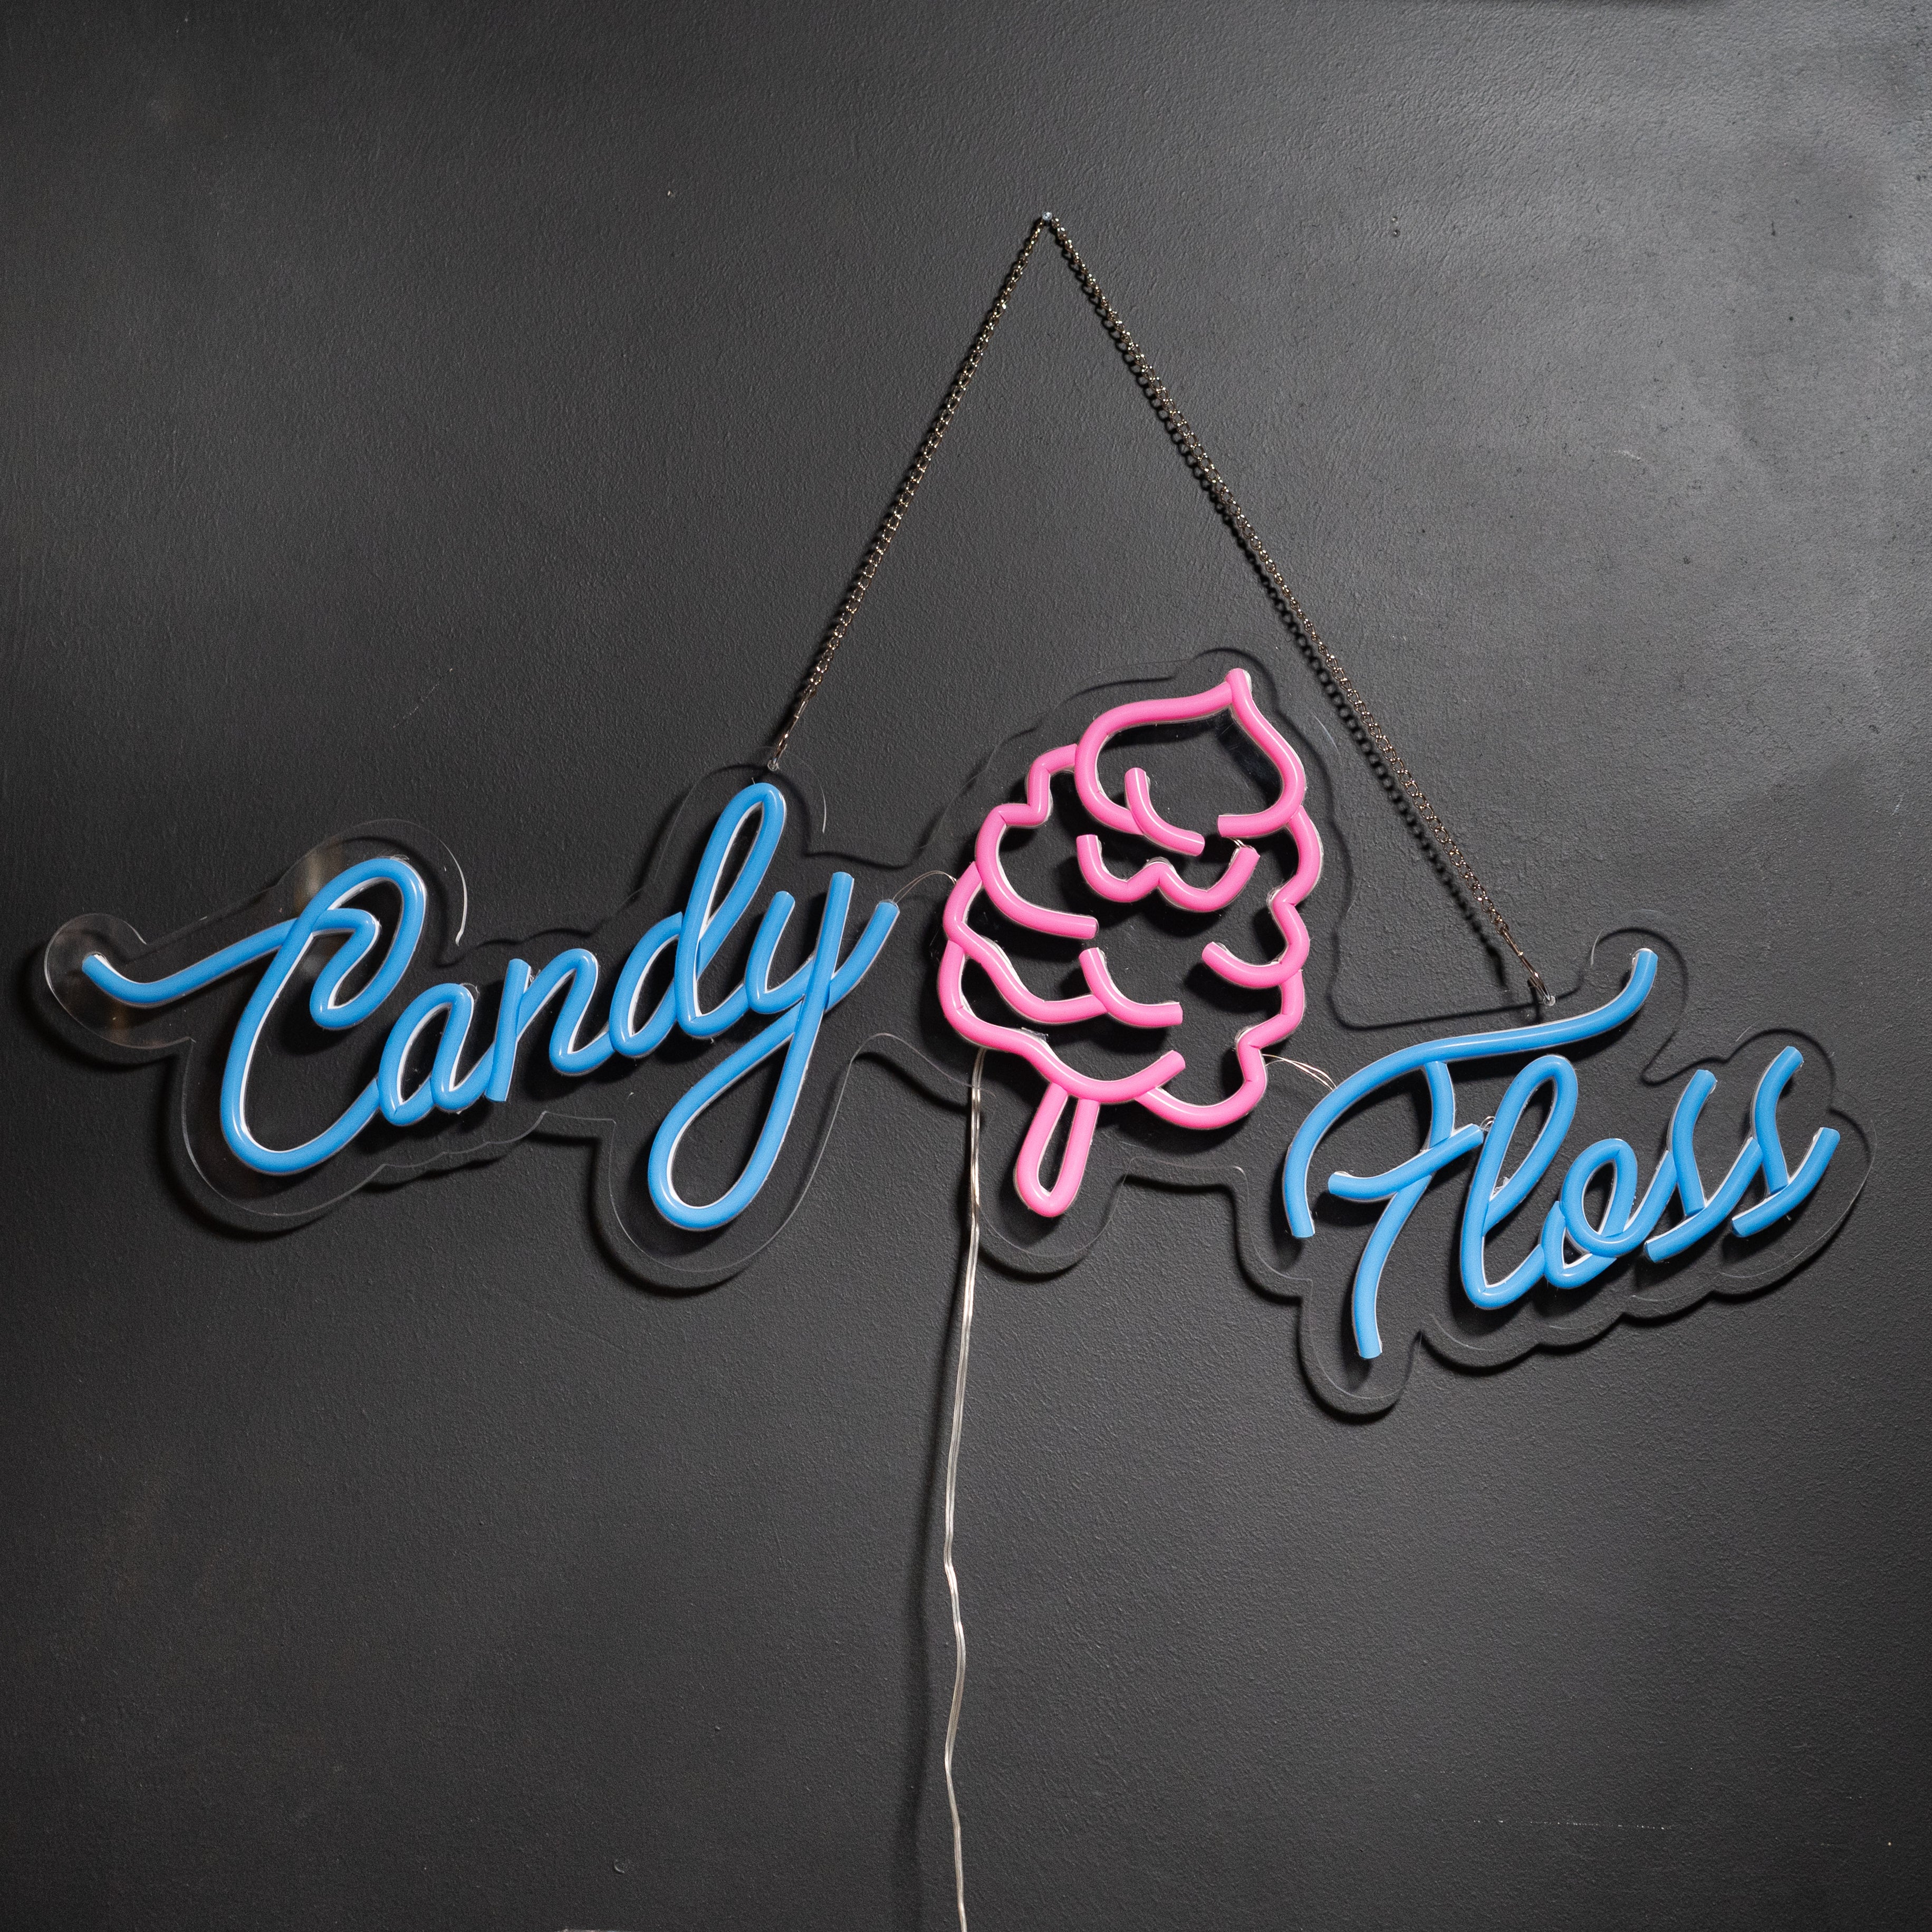 Candy floss Neon style LED light up sign